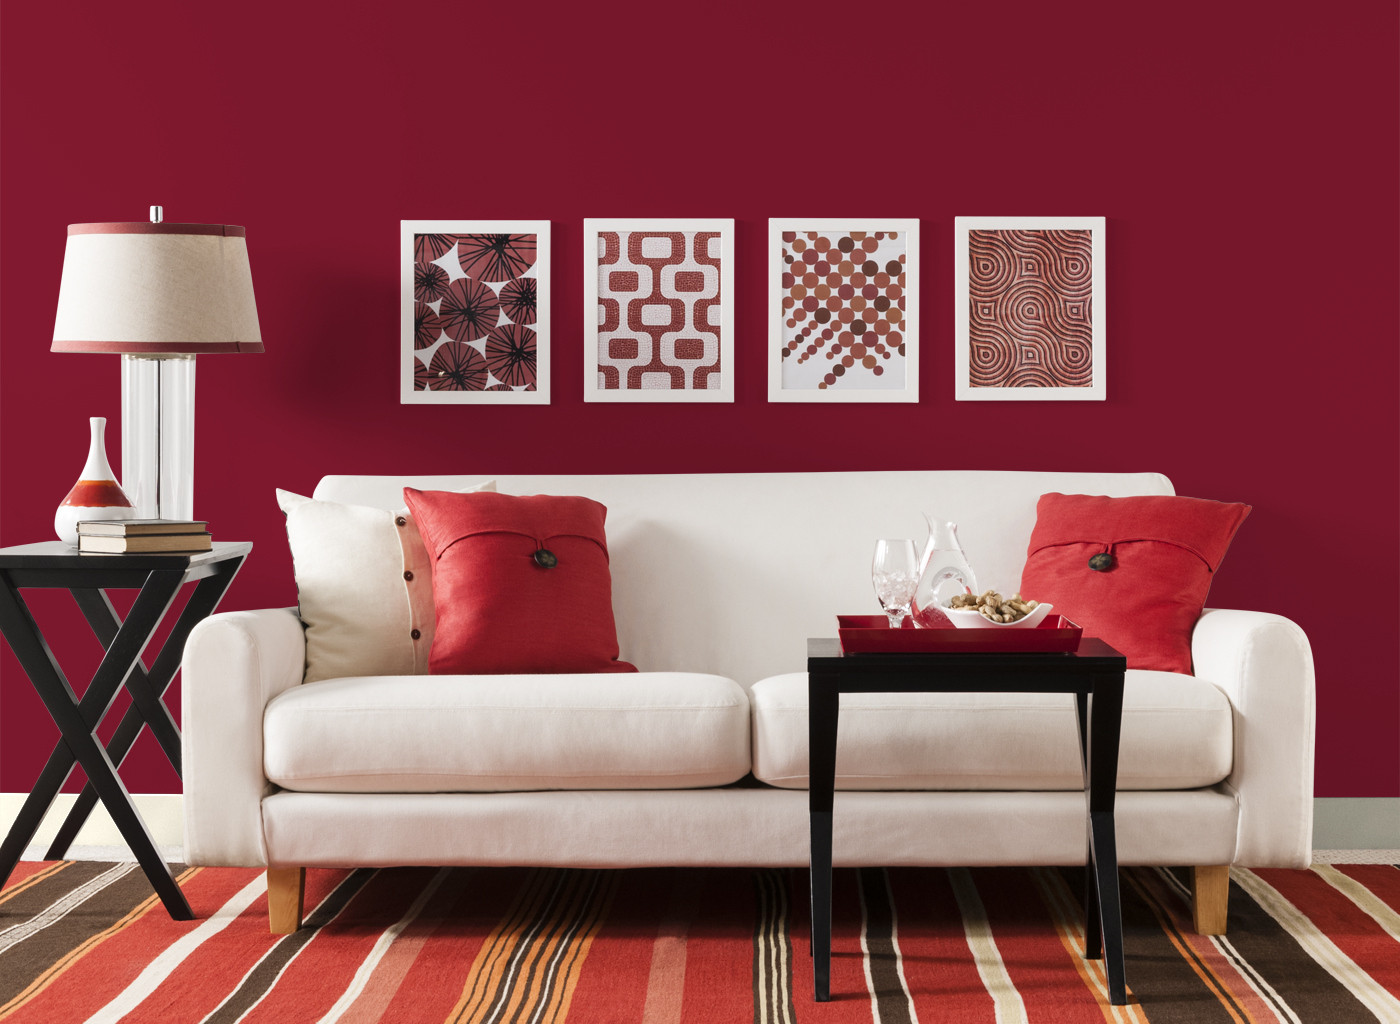 Best Paint For Living Room
 Best Paint Color for Living Room Ideas to Decorate Living